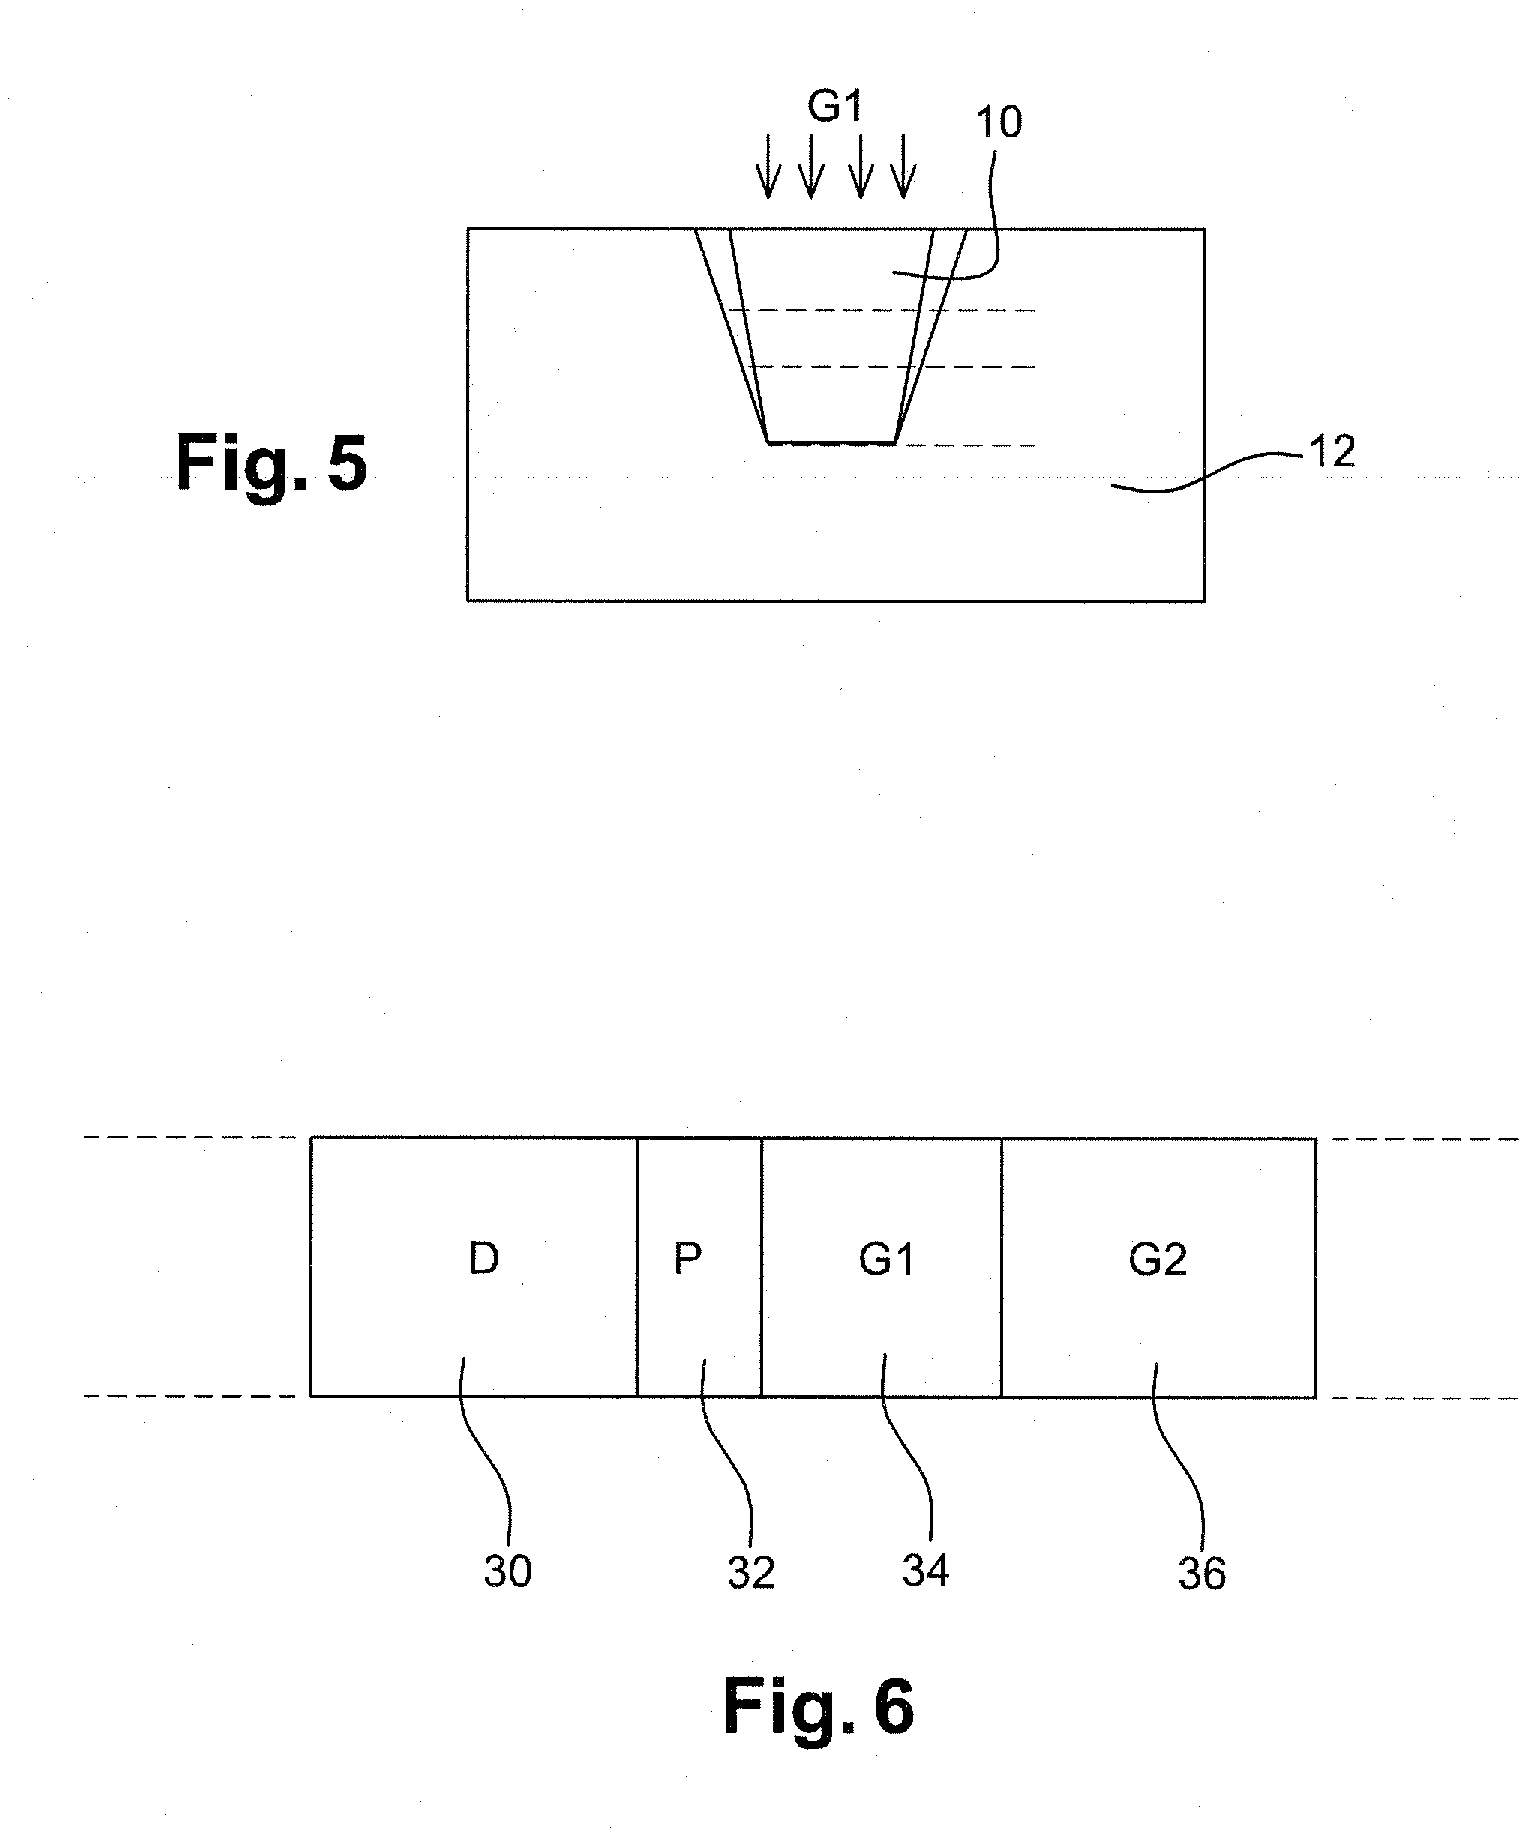 Method for producing a deep trench in a microelectronic component substrate